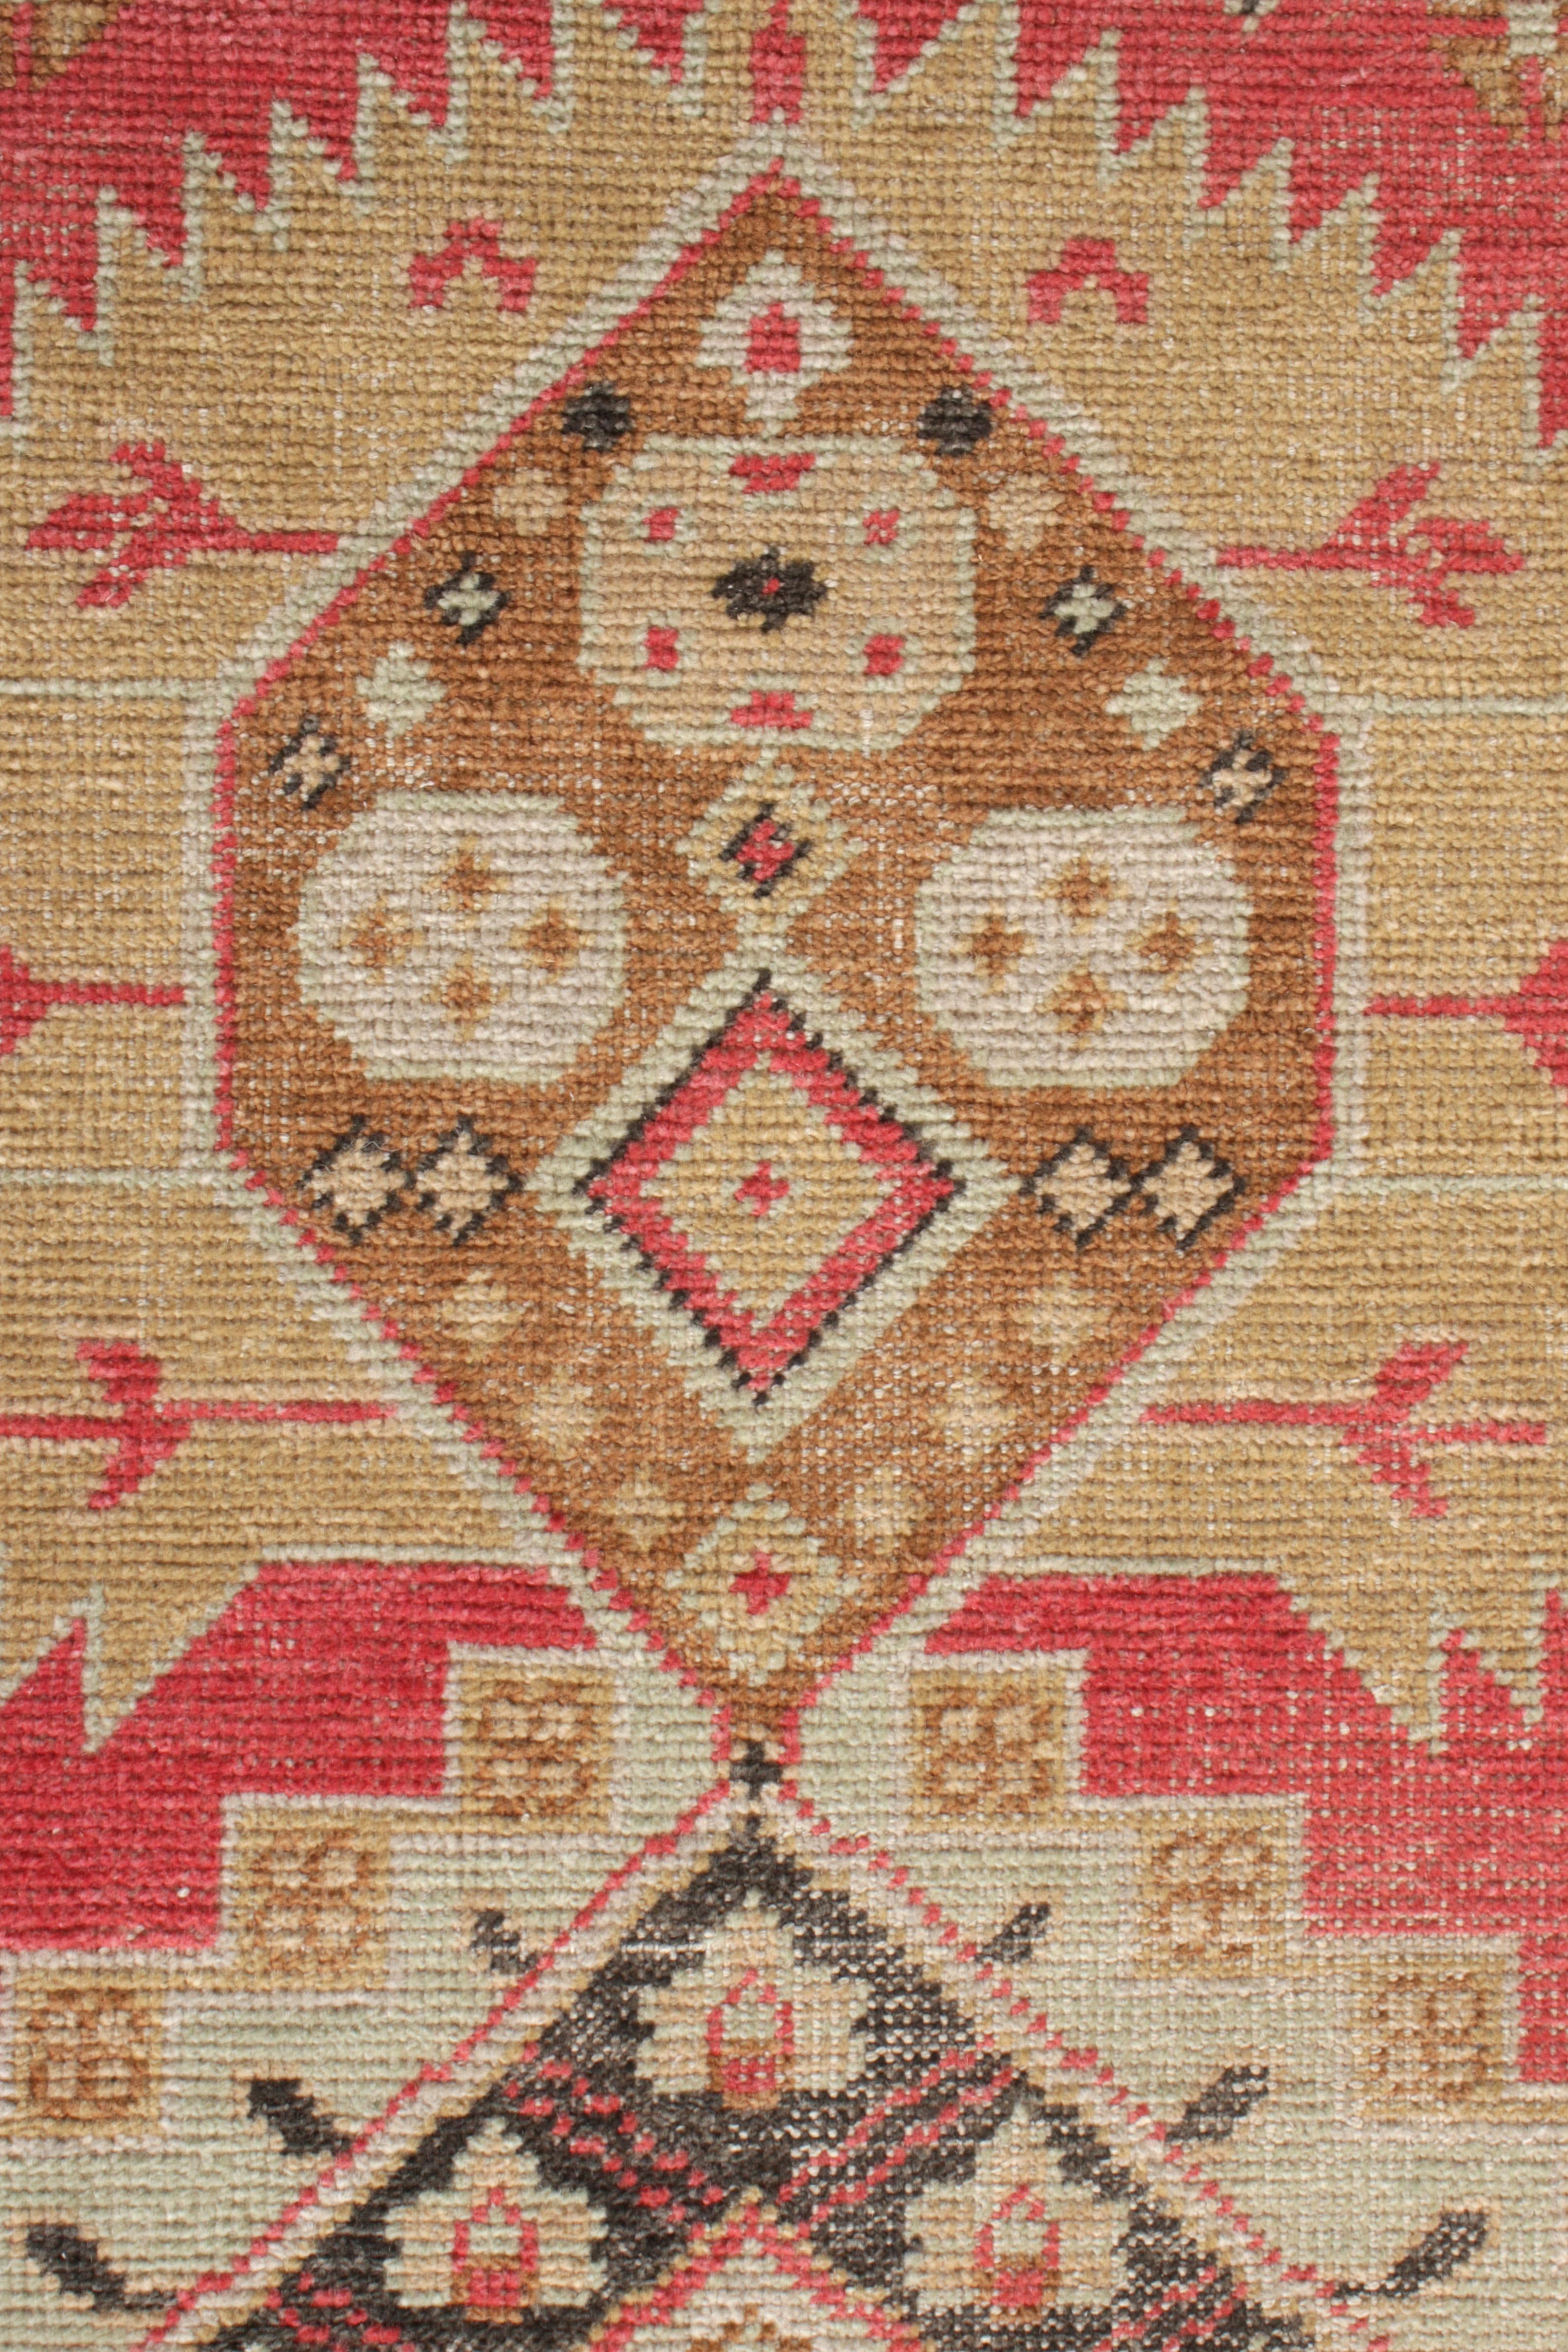 Rug & Kilim's Distressed Classic Style Teppich in Rot, Beige-Braun Medaillon-Muster (Indisch) im Angebot